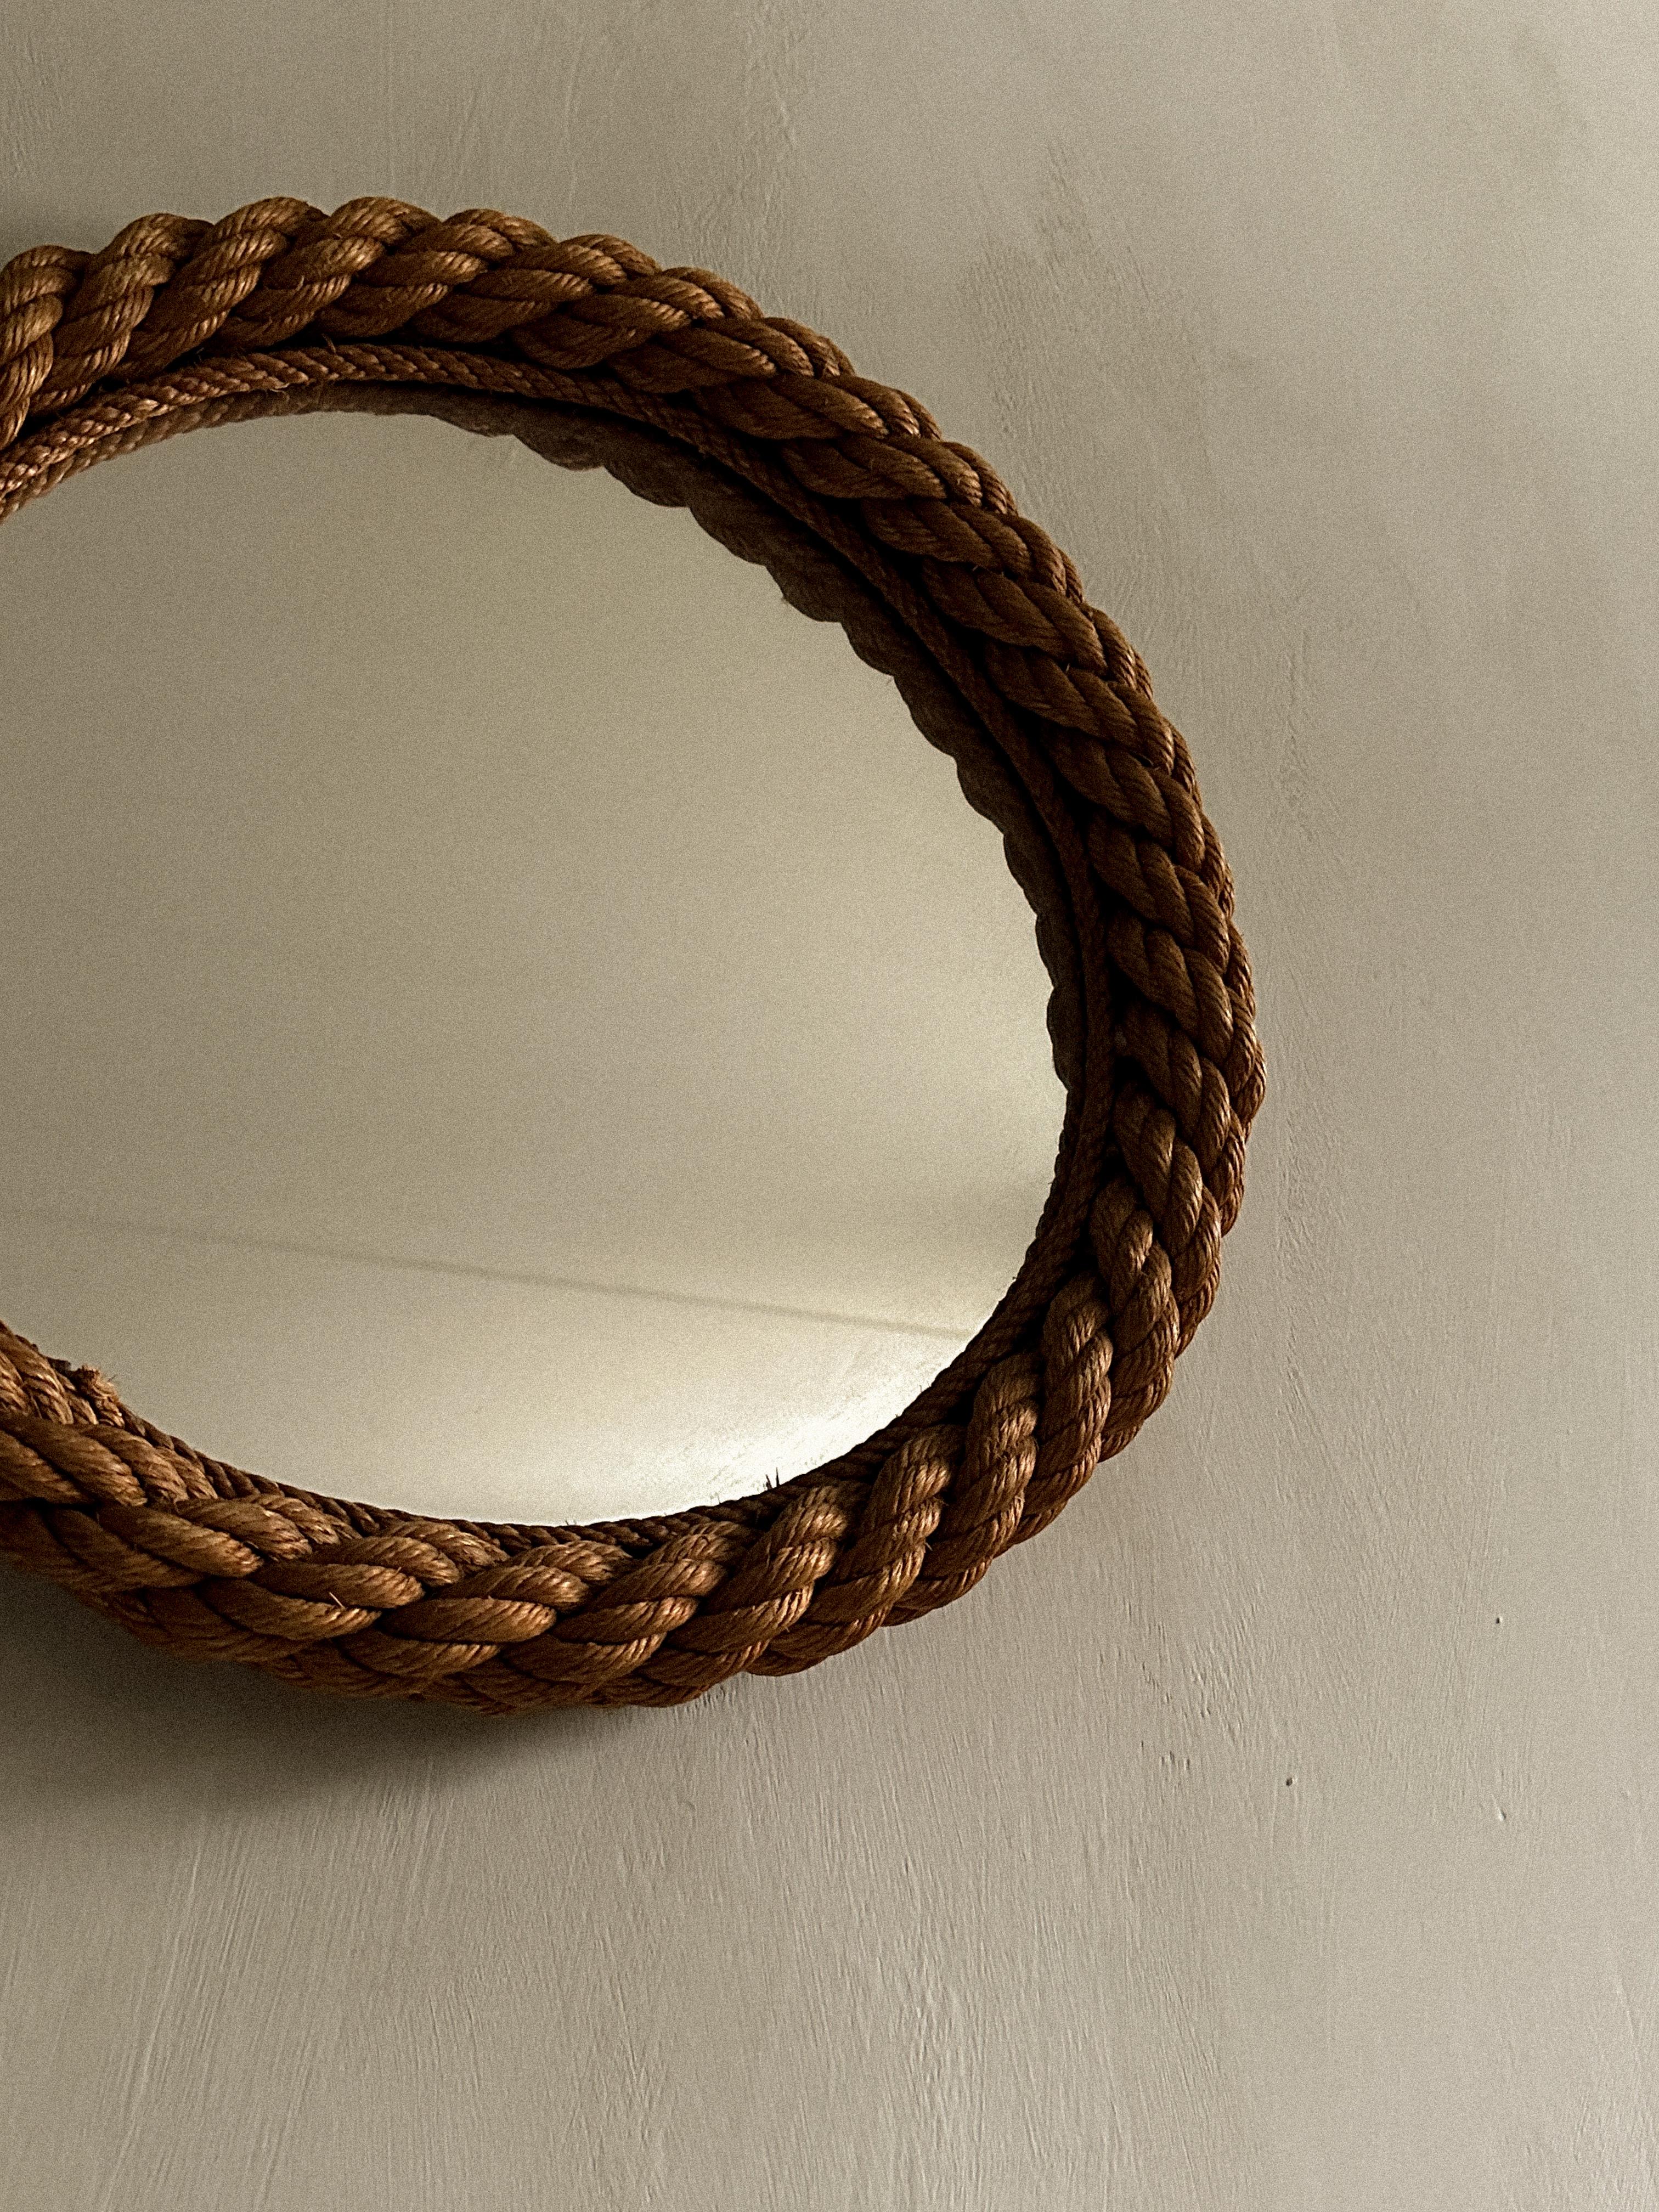 French A Vintage Round Rope Mirror by Adrien Audoux and Frida Minet, France, c. 1960s